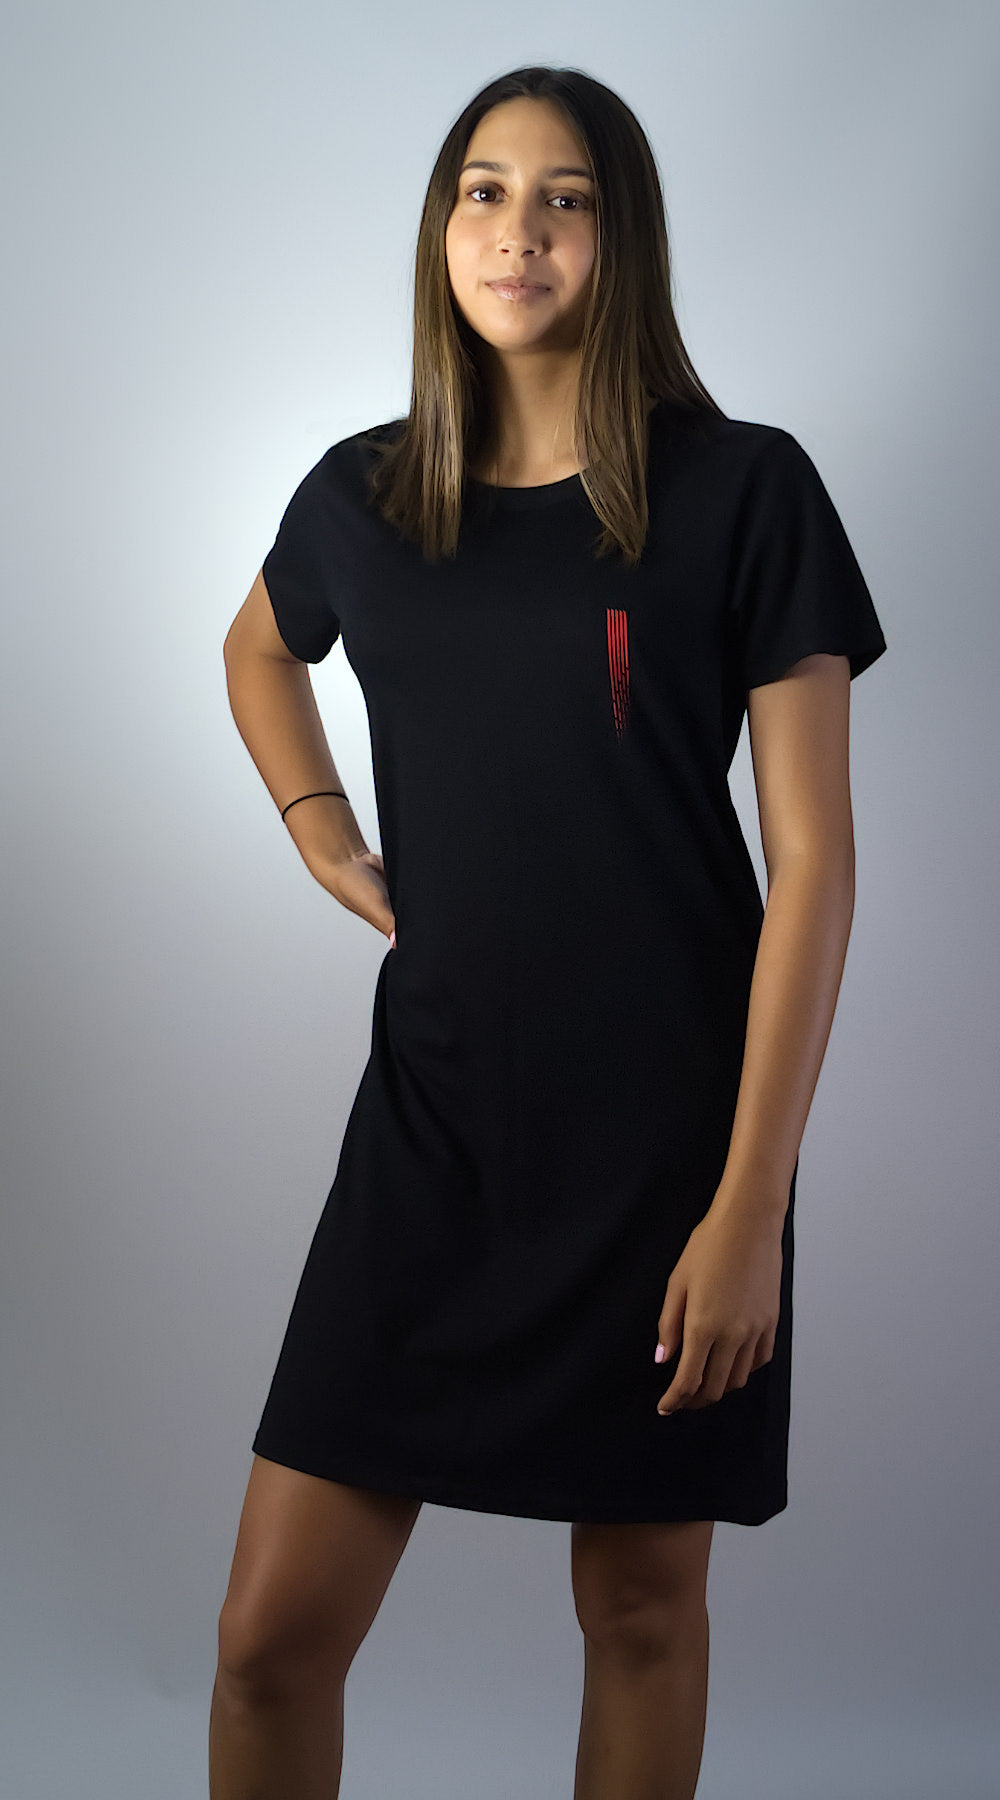 Women's black limited edition Art-Dress 'OctoBeast' by Steven Fellowes, GOTS certified organic cotton, front view